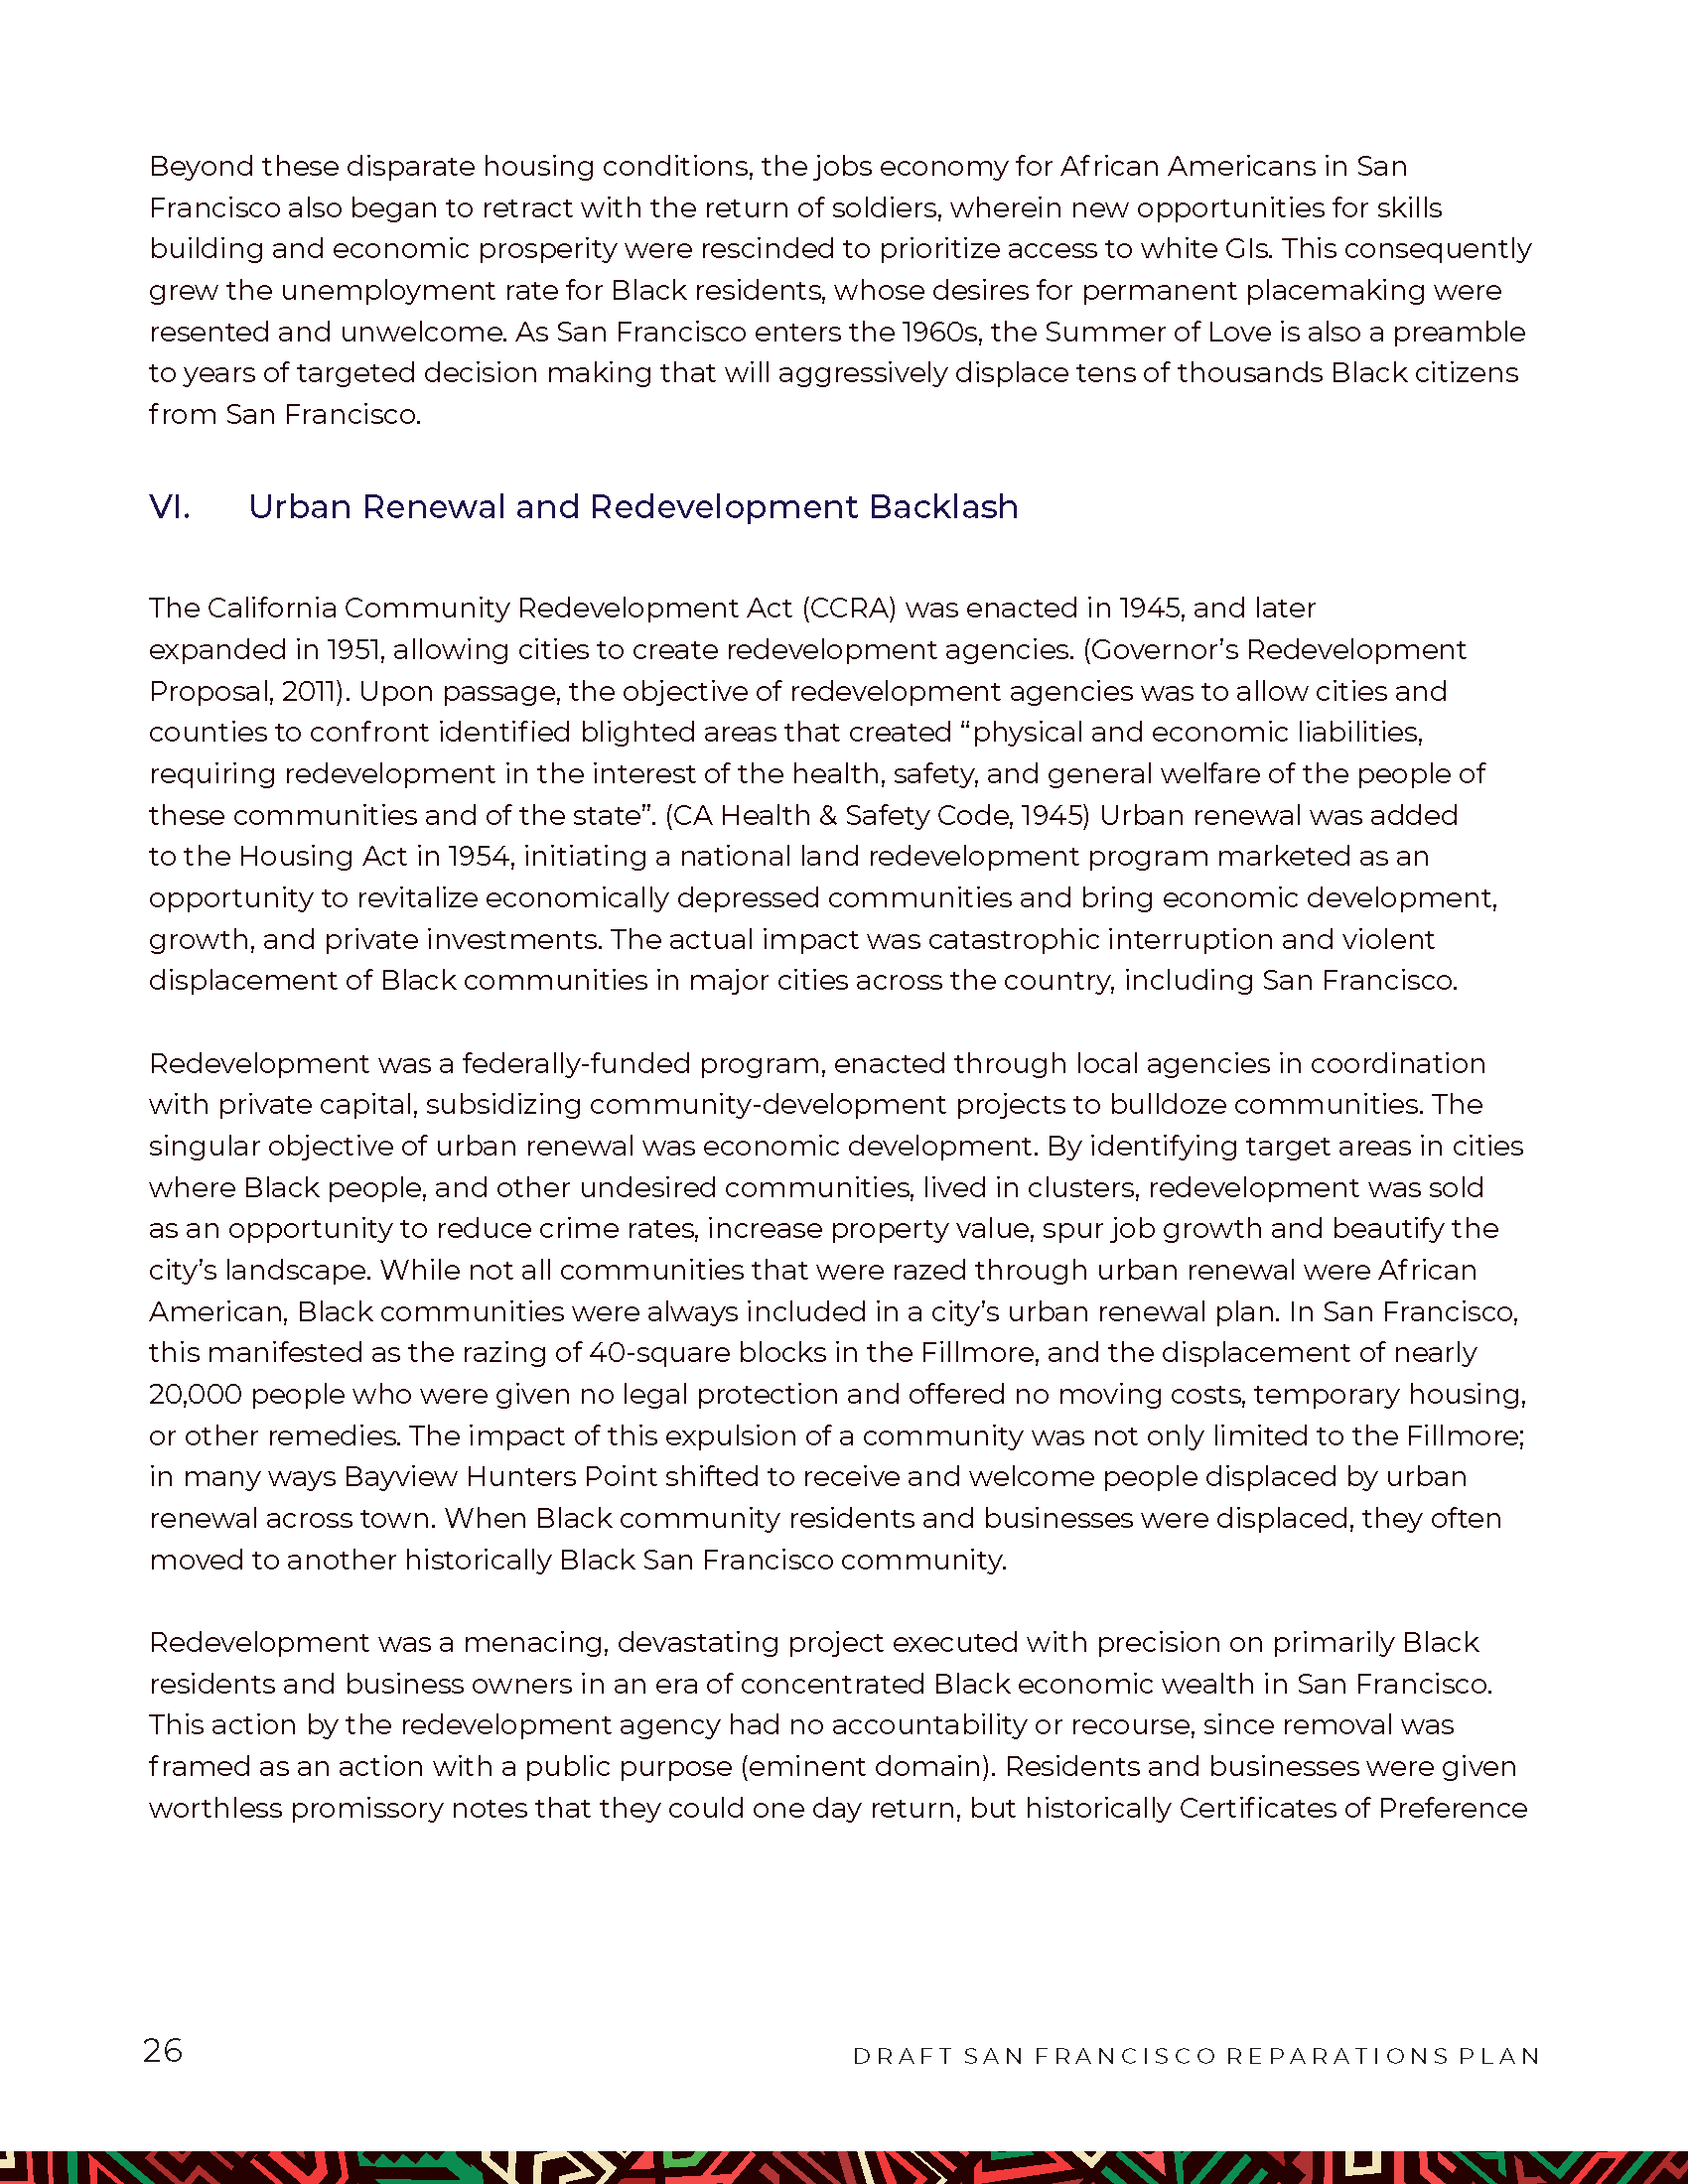 HRC Reparations 2022 Report Final_0_Page_26.png